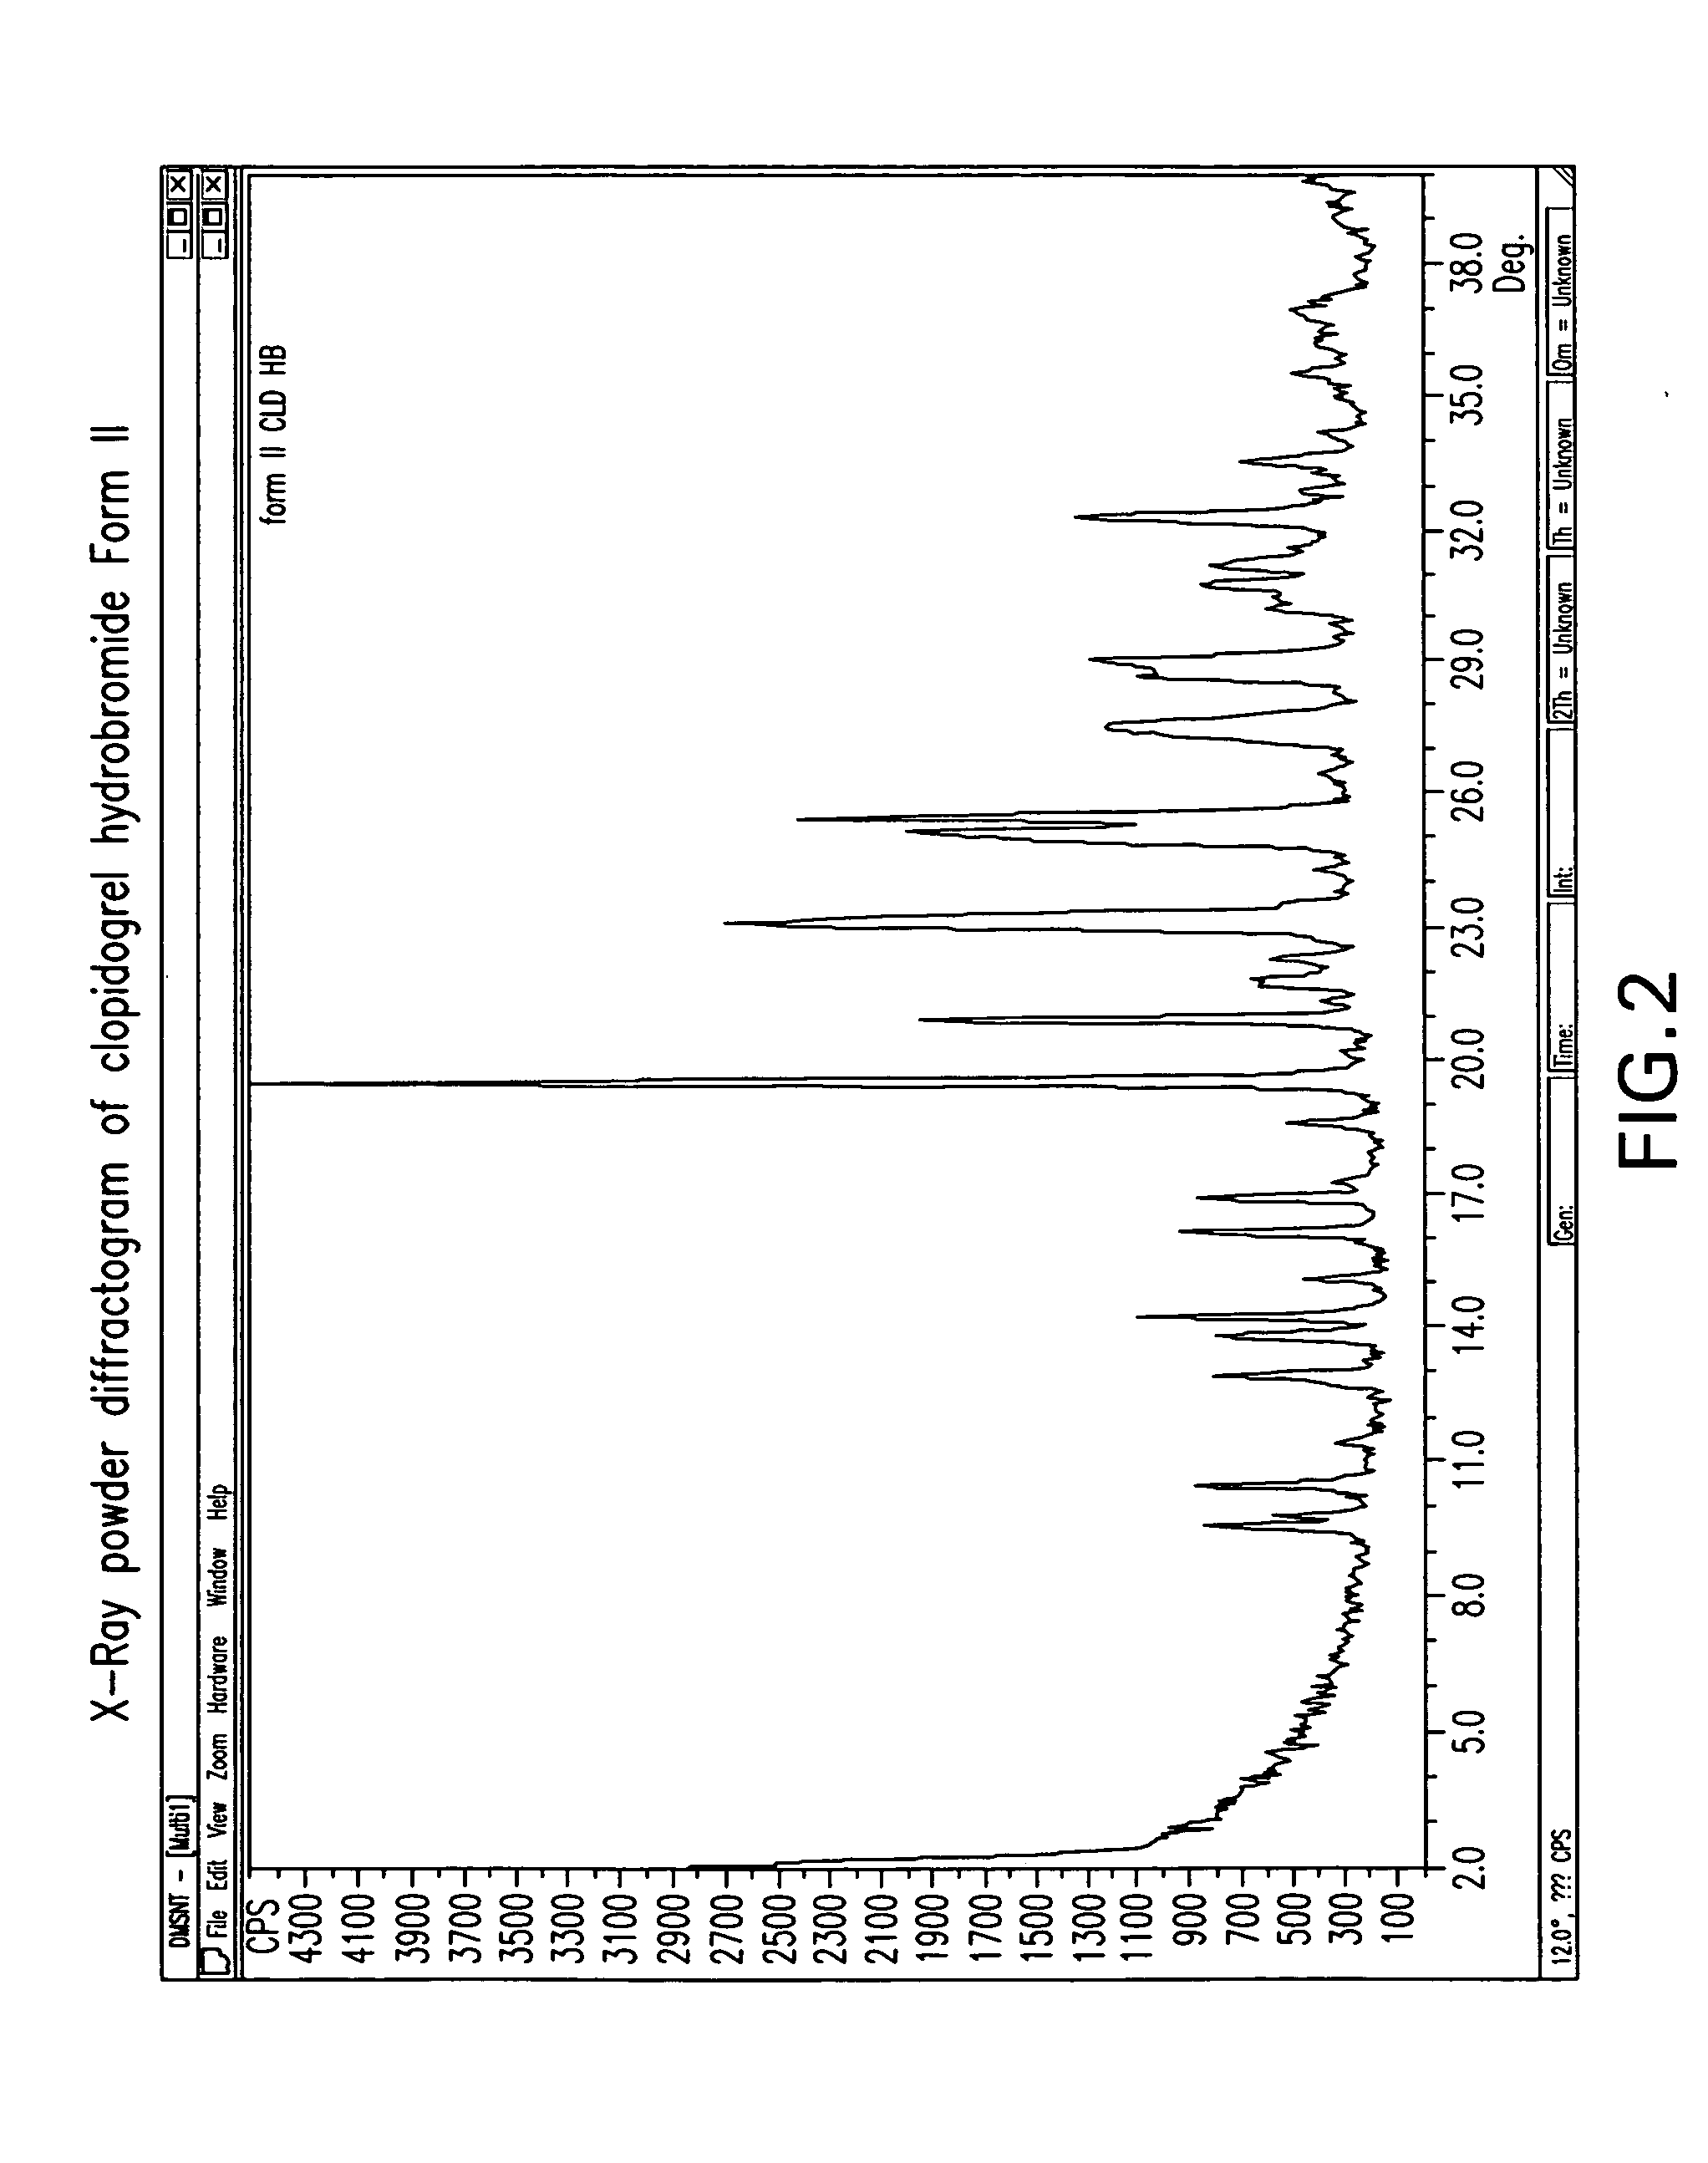 Crystalline clopidogrel hydrobromide and processes for preparation thereof